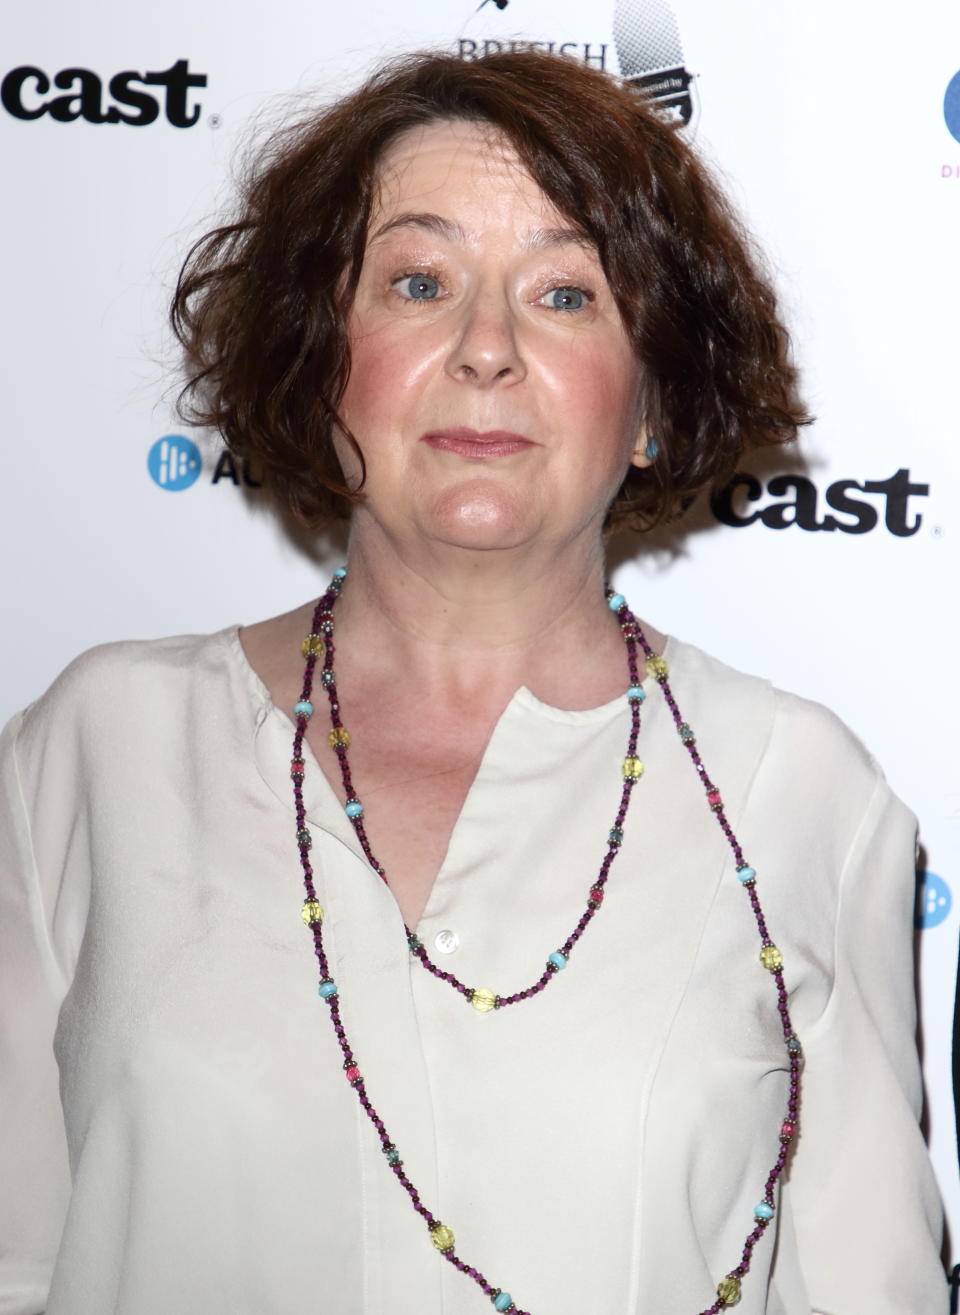 LONDON, UNITED KINGDOM - 2019/05/18: Jane Garvey attends the British Podcast Awards 2019 at Kings Place. (Photo by Keith Mayhew/SOPA Images/LightRocket via Getty Images)